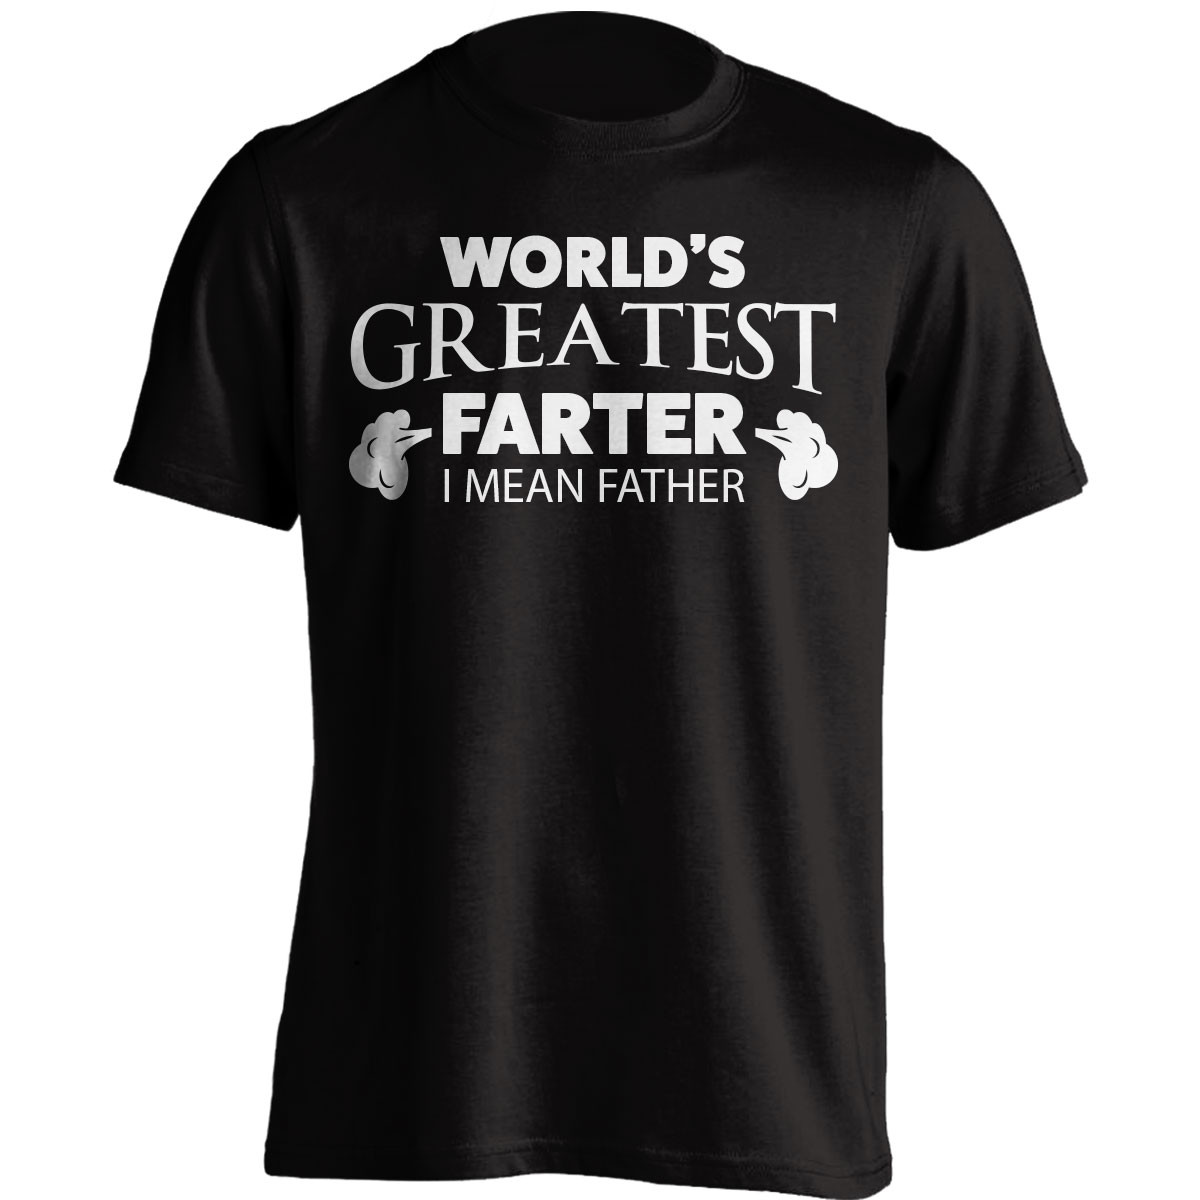 World's Greatest Farter - I Mean Father T Shirt